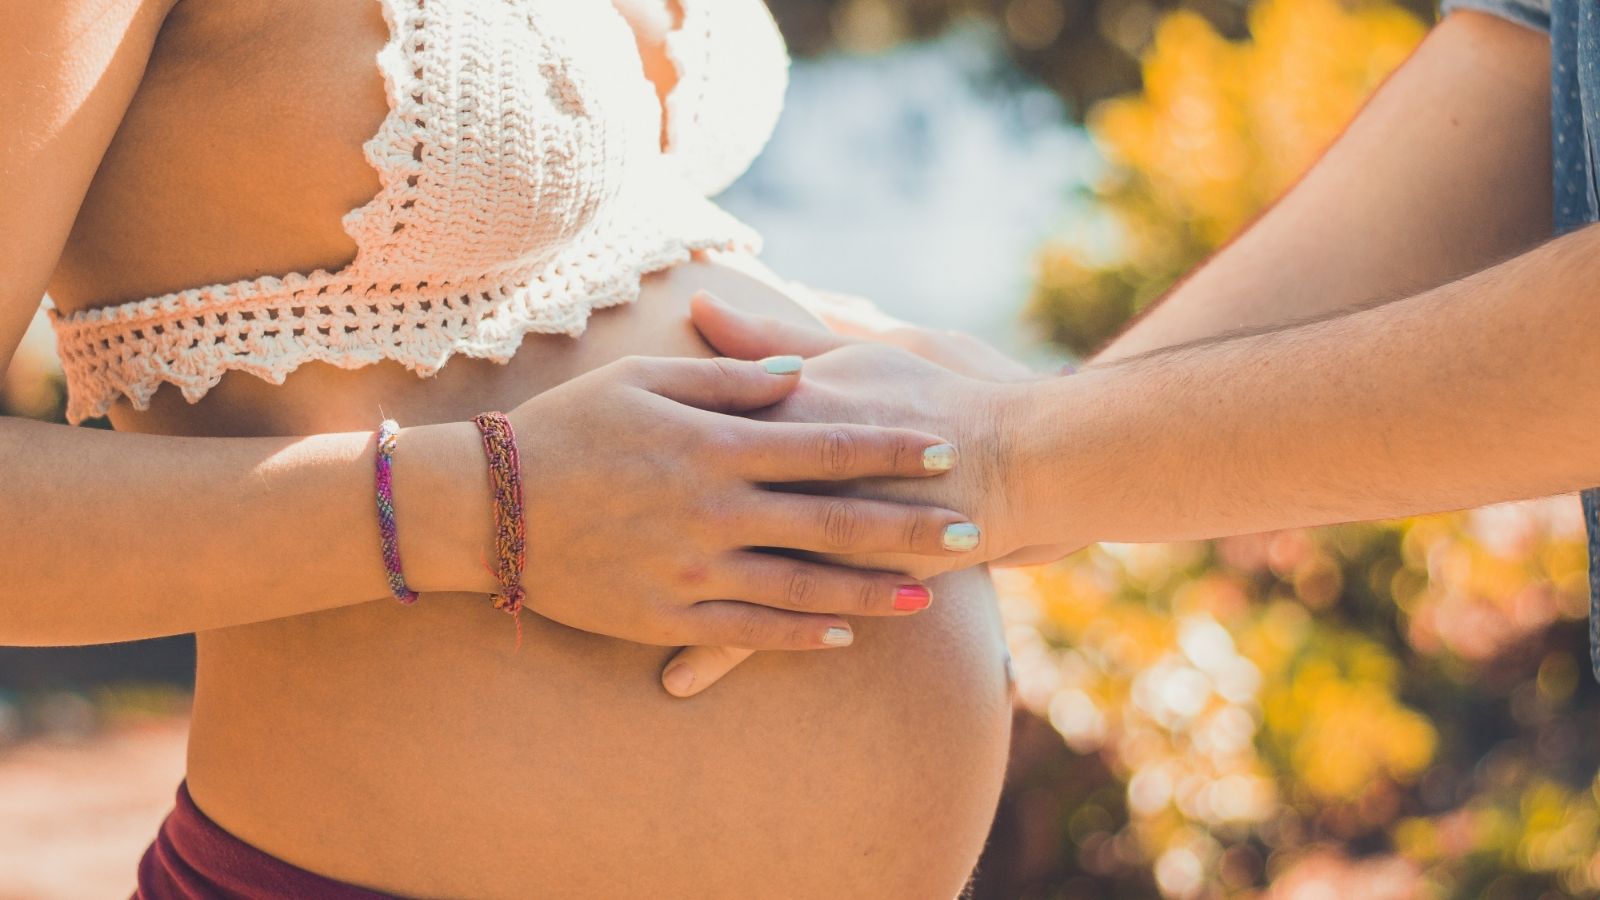 A pair of hands touch a pregnant belly.